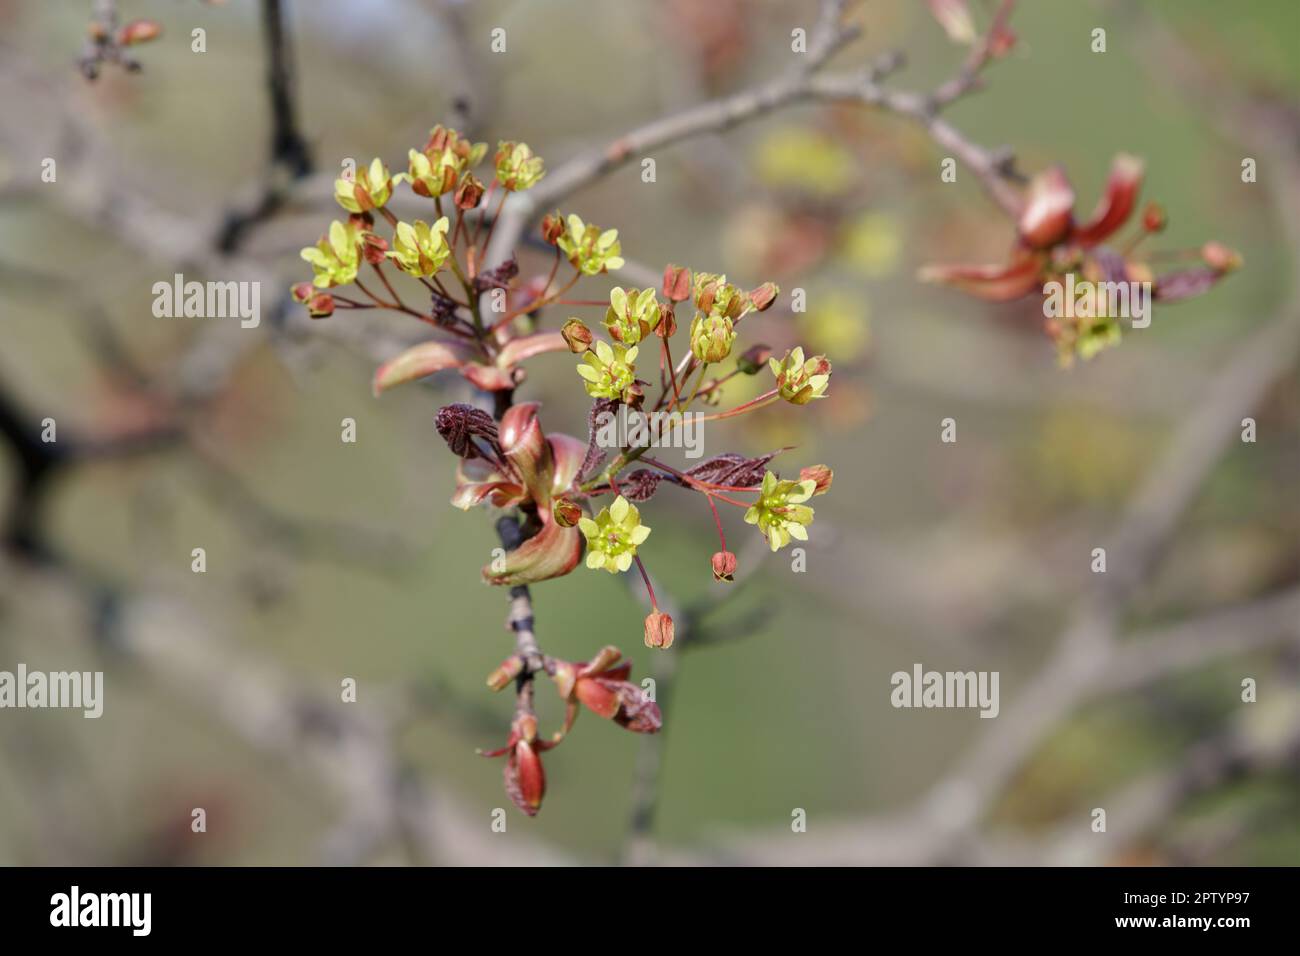 Maple flowers. Flowering maple branch with seeds in spring. Closeup of flowers and young leaves of the maple tree (Acer platanoides) Stock Photo